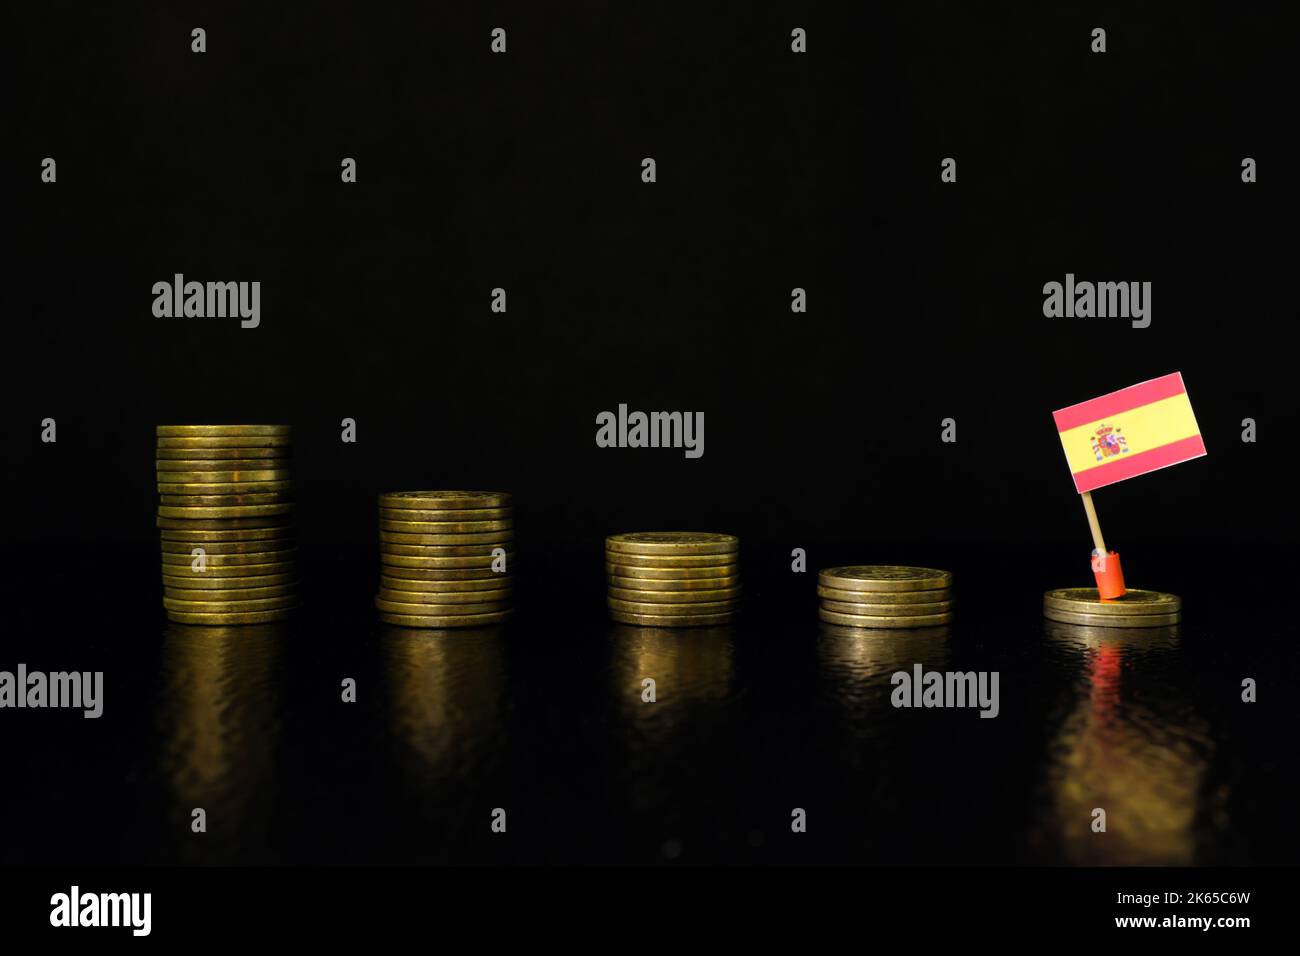 Spain economic recession, financial crisis and currency depreciation concept. Spanish flag in decreasing stack of coins in dark black background. Stock Photo